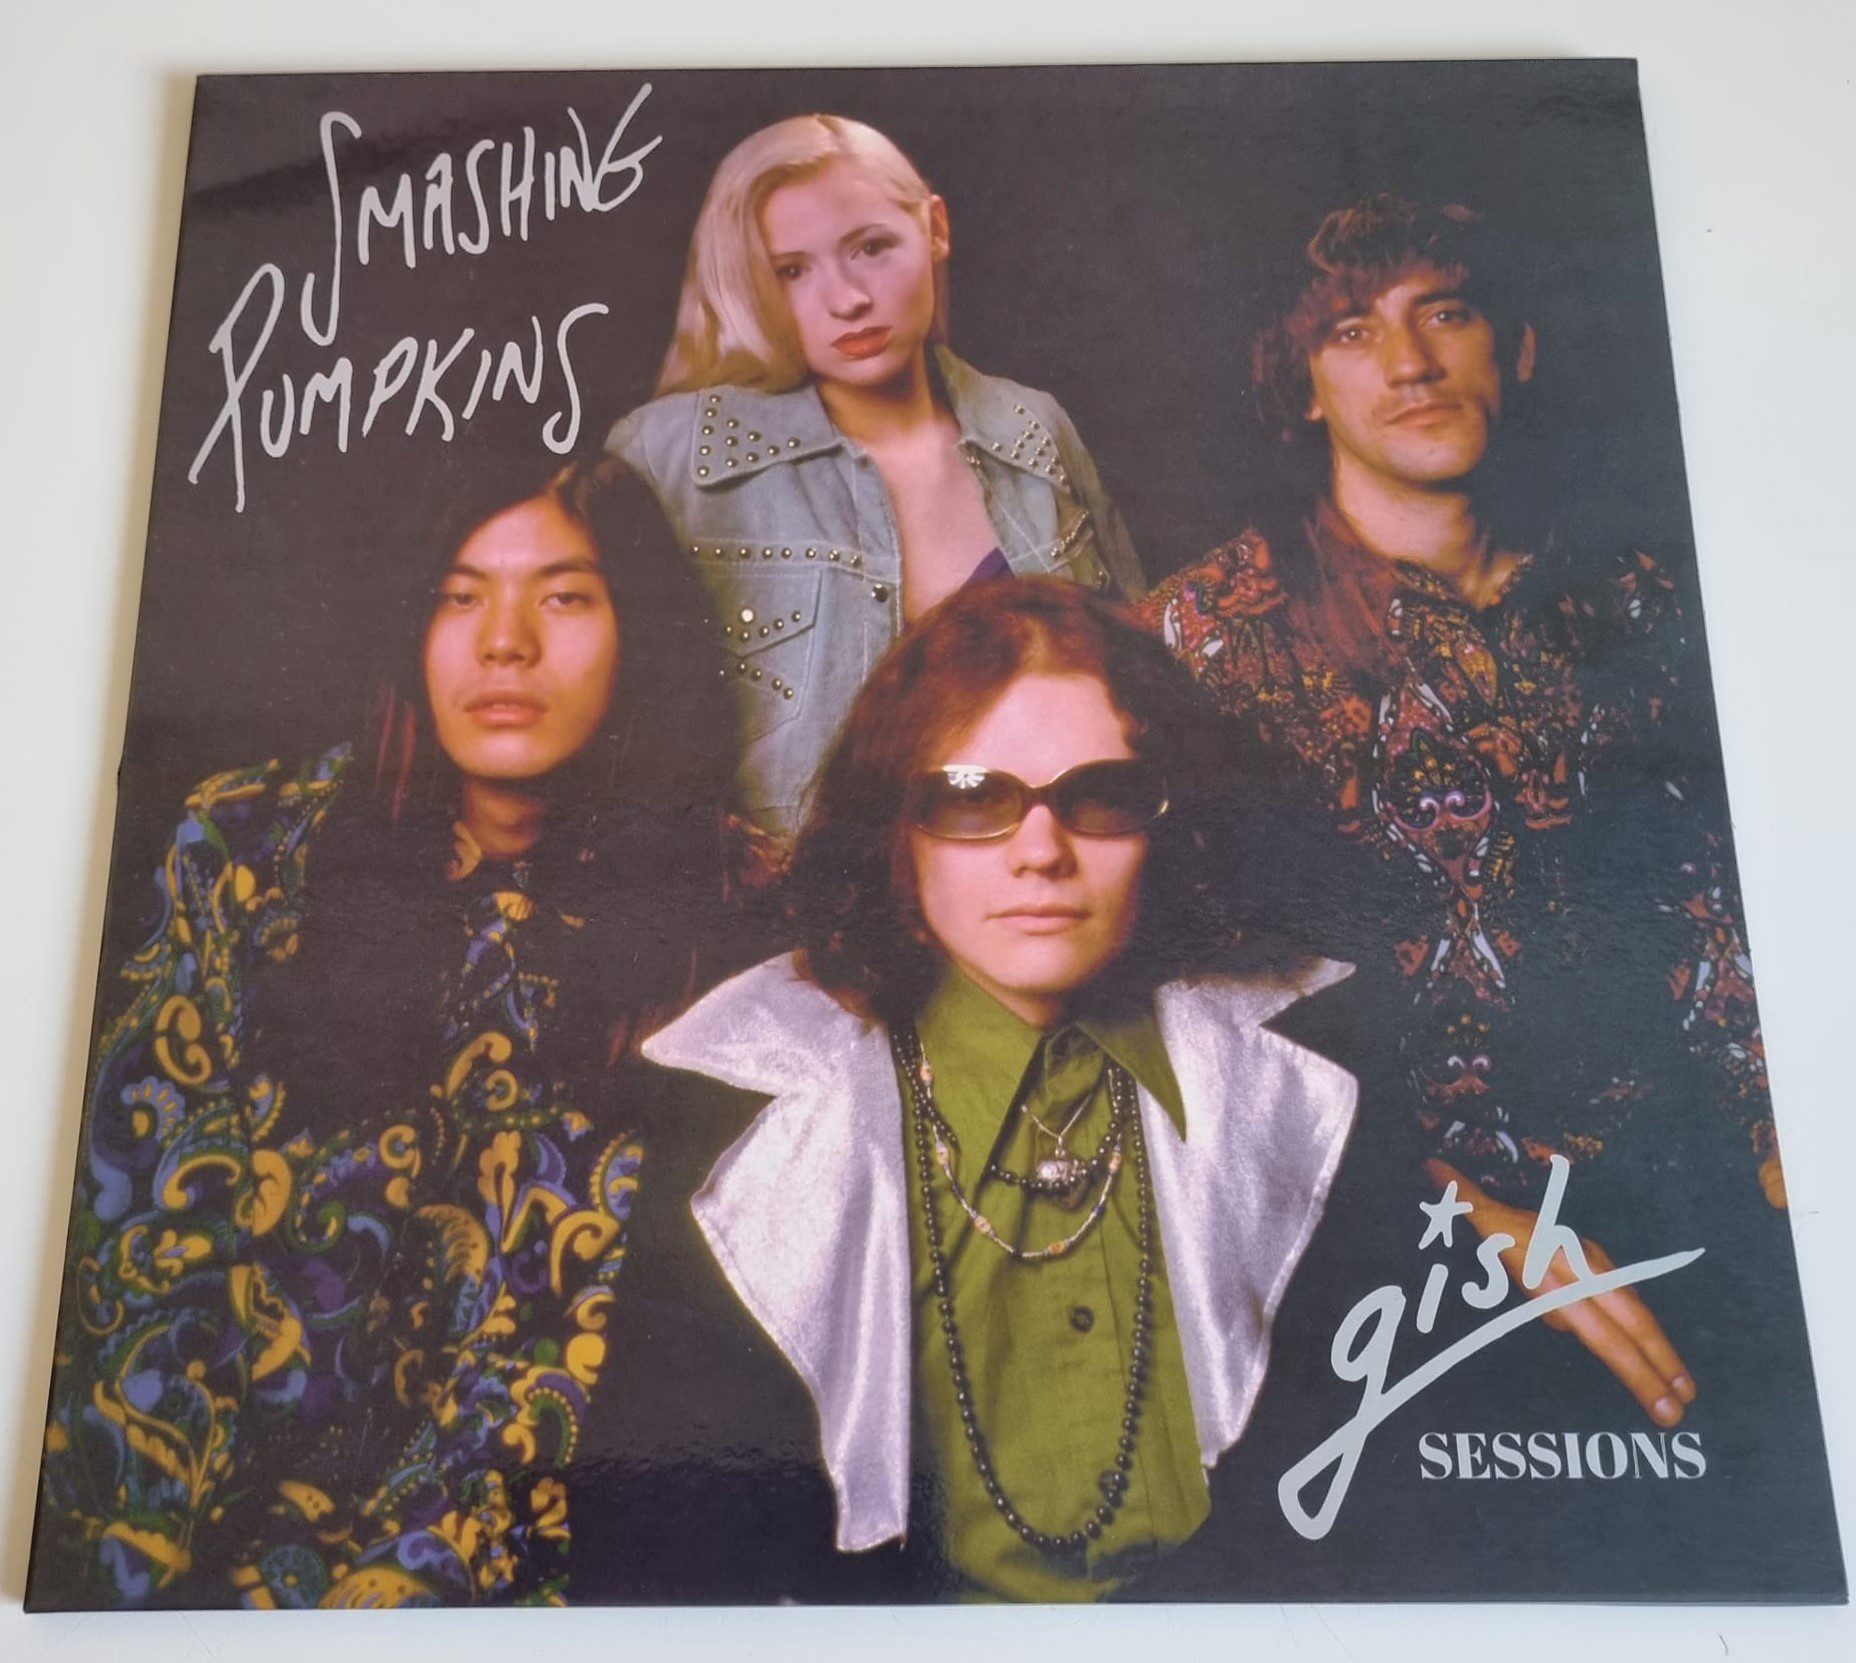 Buy this rare Smashing Pumpkins record by clicking here